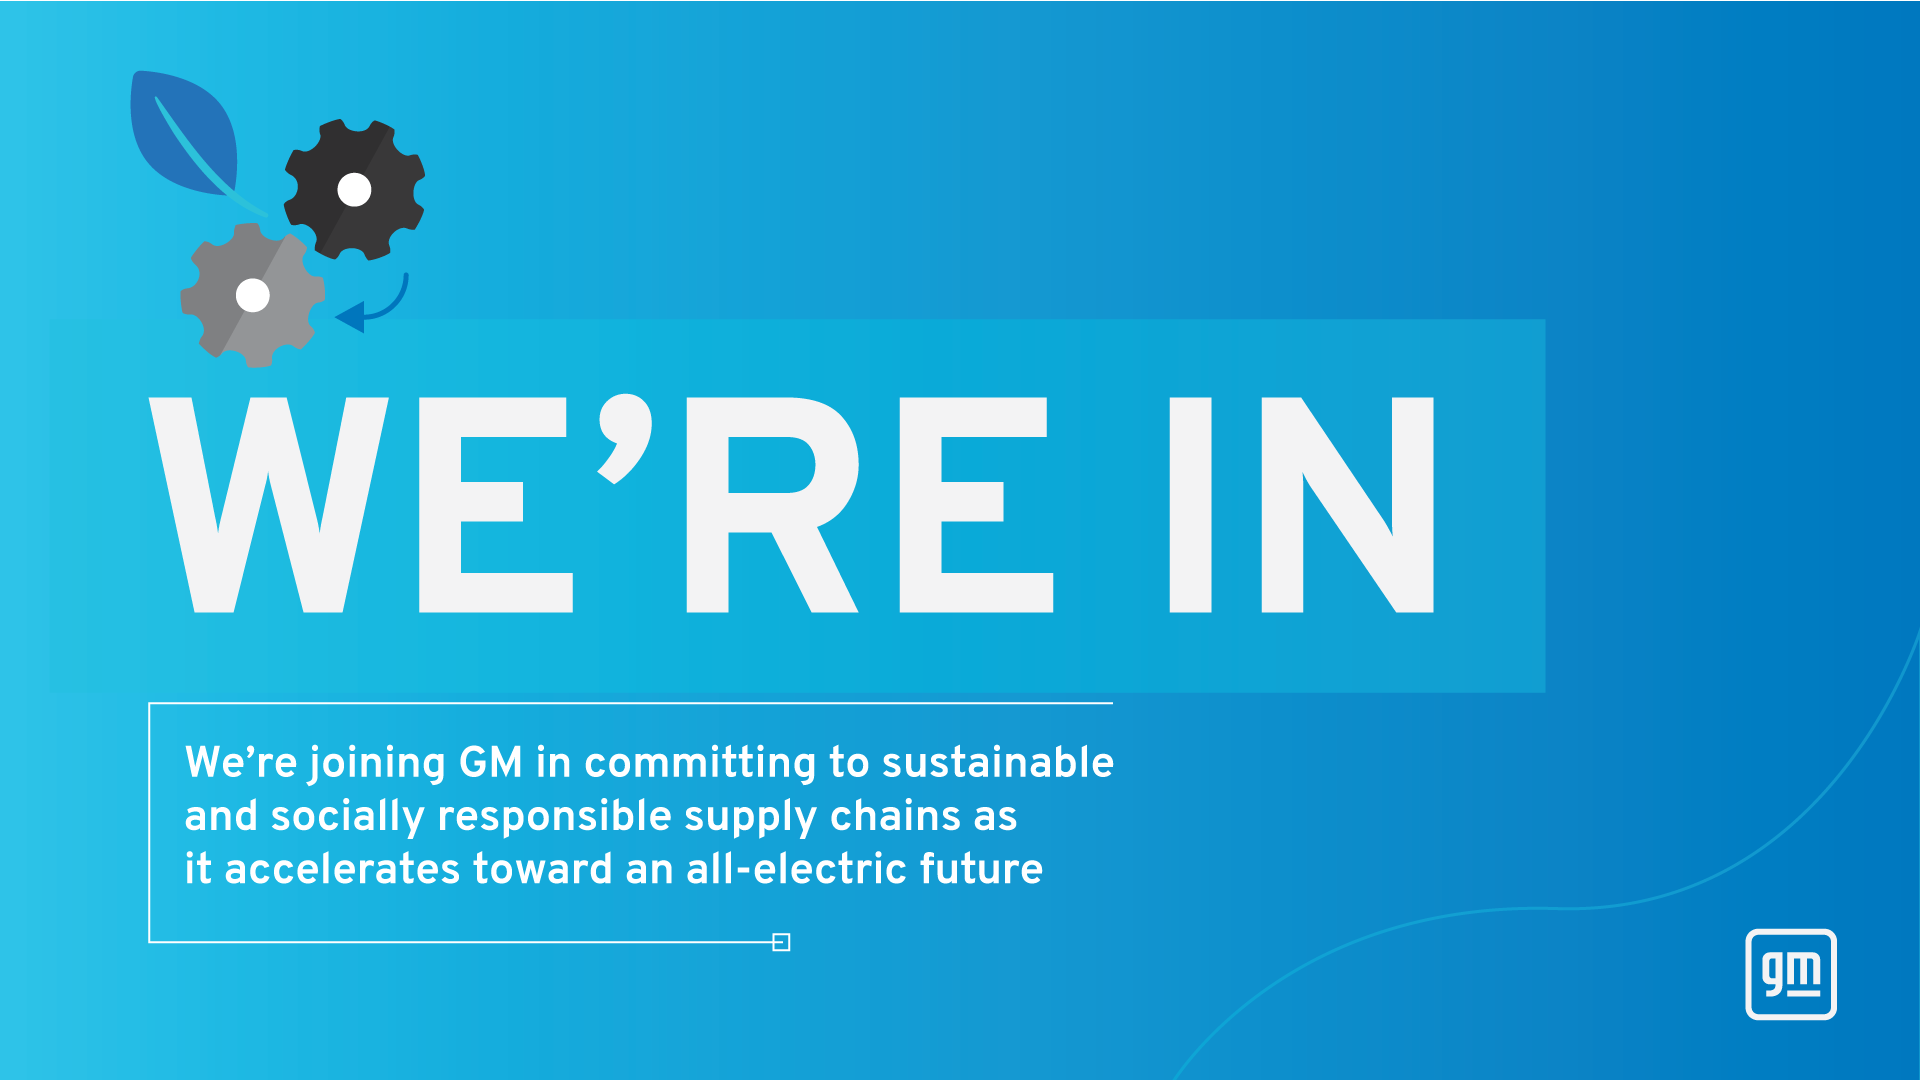 We're joining GM in committing to sustainable and socially responsible supply chains as it accelerates toward an all-electric future